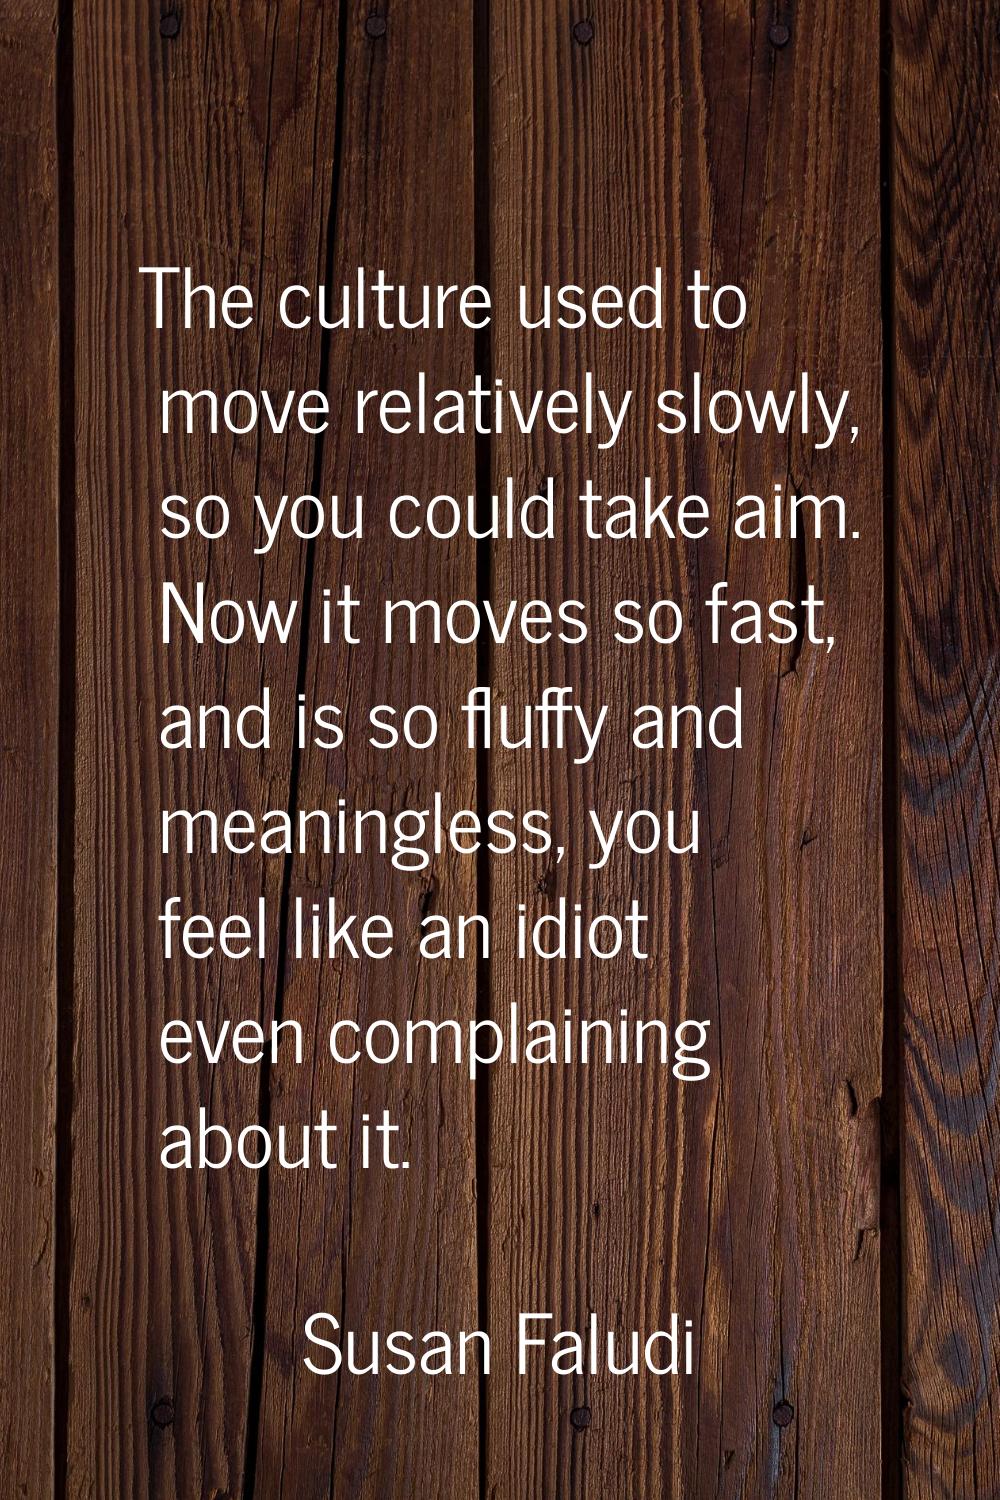 The culture used to move relatively slowly, so you could take aim. Now it moves so fast, and is so 